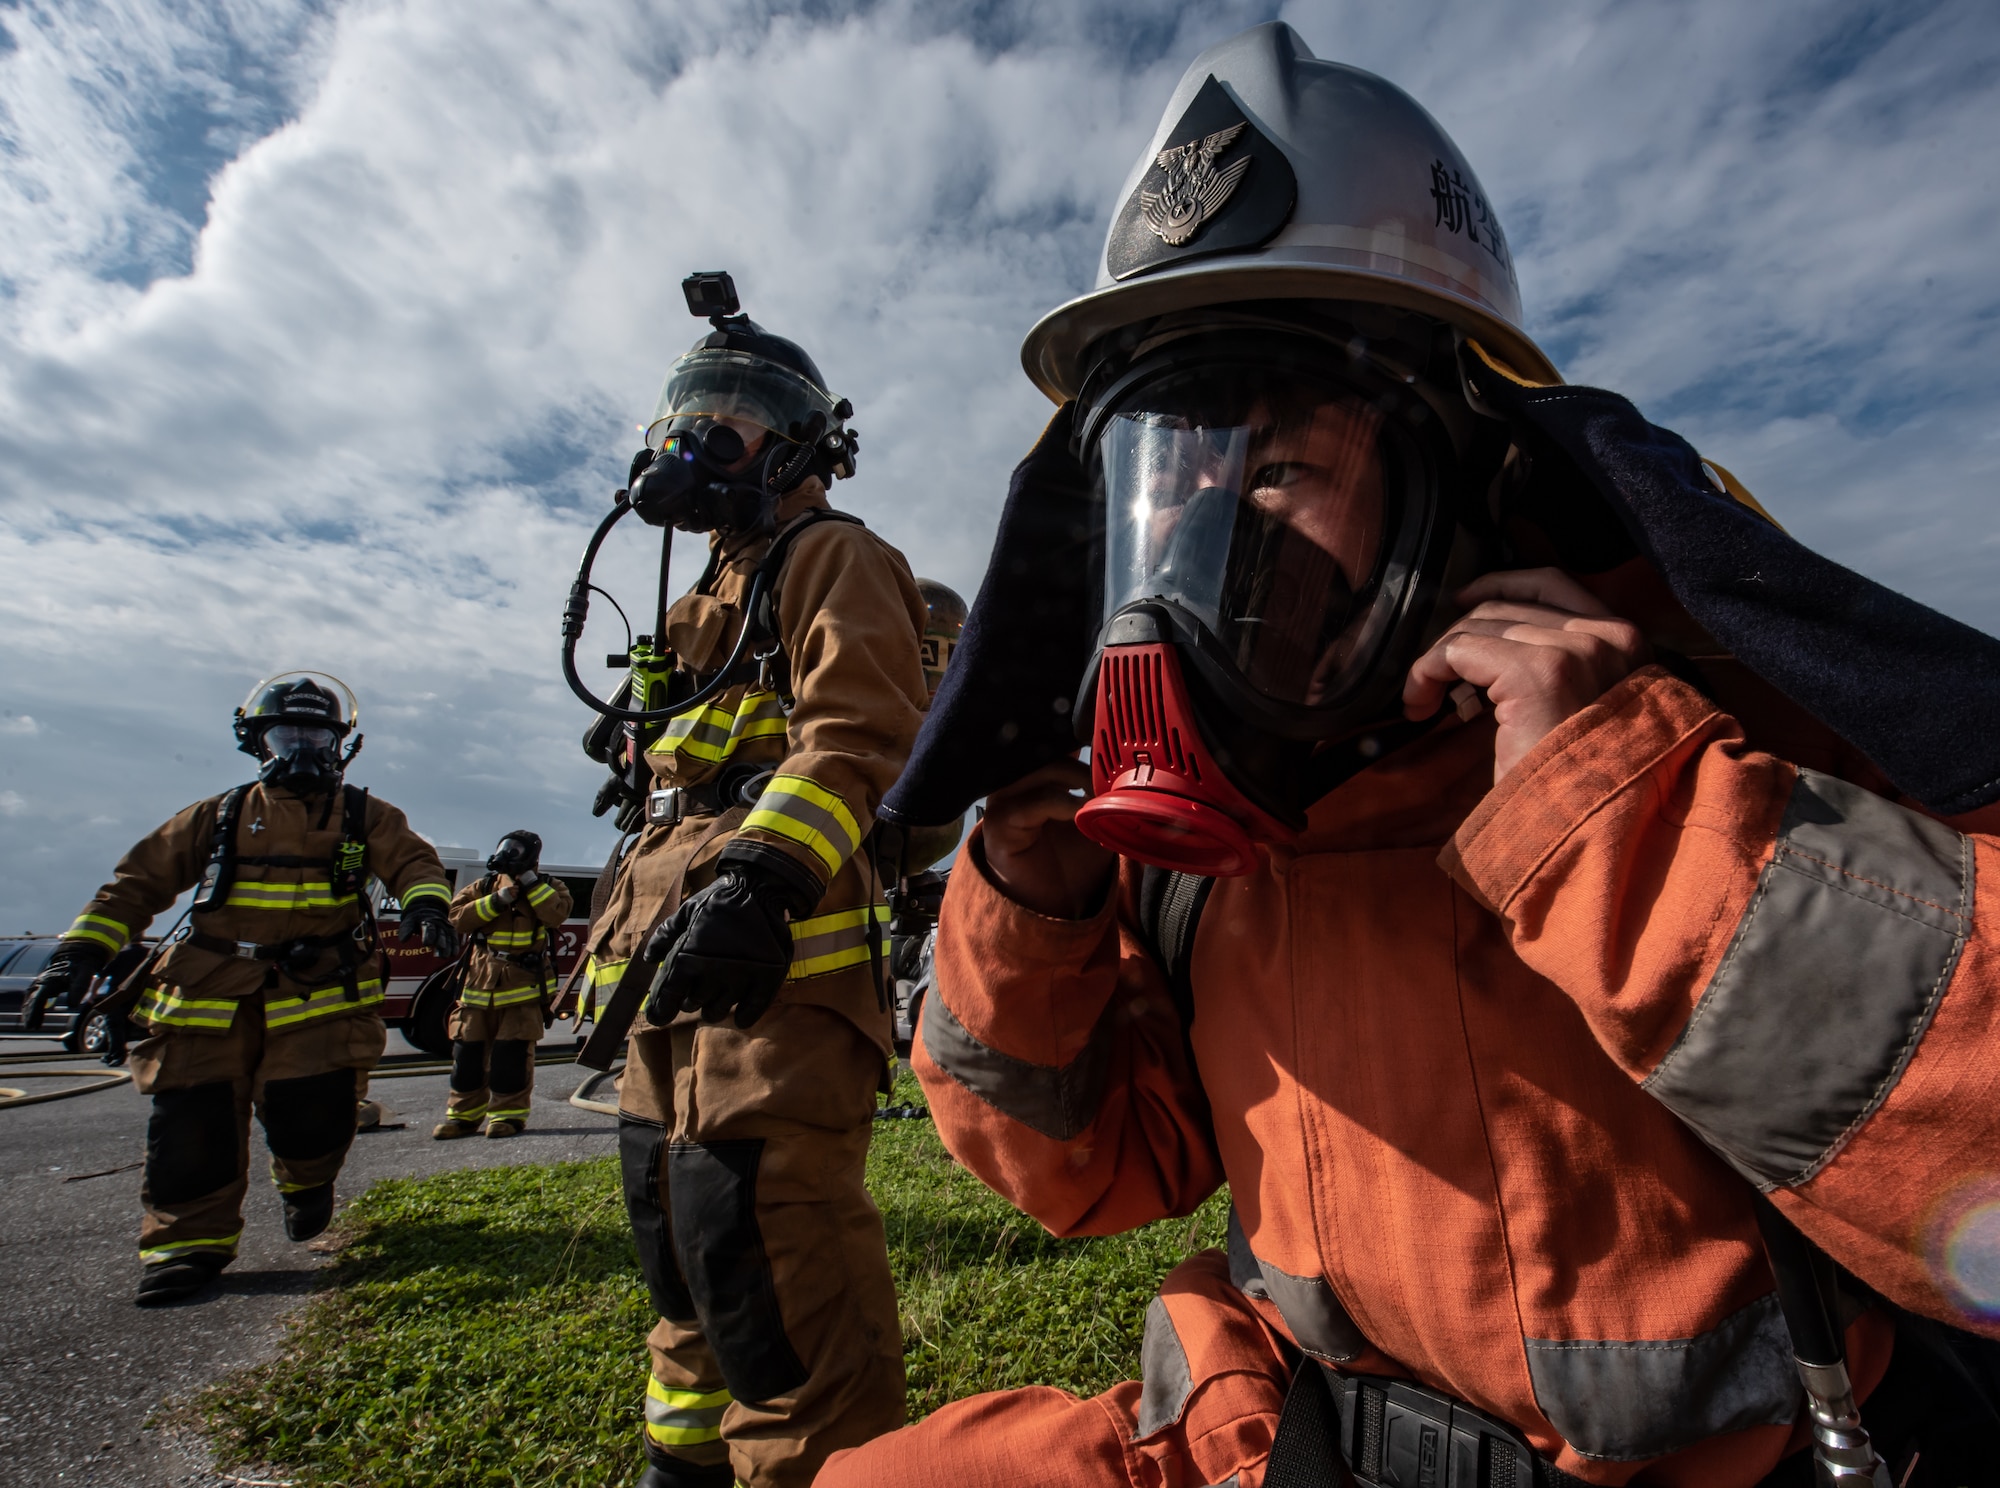 A Japan Air Self Defense Force firefighter from the 9th Wing, Naha Air Base, Japan, dons firefighting equipment Nov. 15, 2018, at Kadena Air Base, Japan. Firefighters conduct training regularly to maintain constant readiness for emergencies. (U.S. Air Force photo by Staff Sgt. Micaiah Anthony)